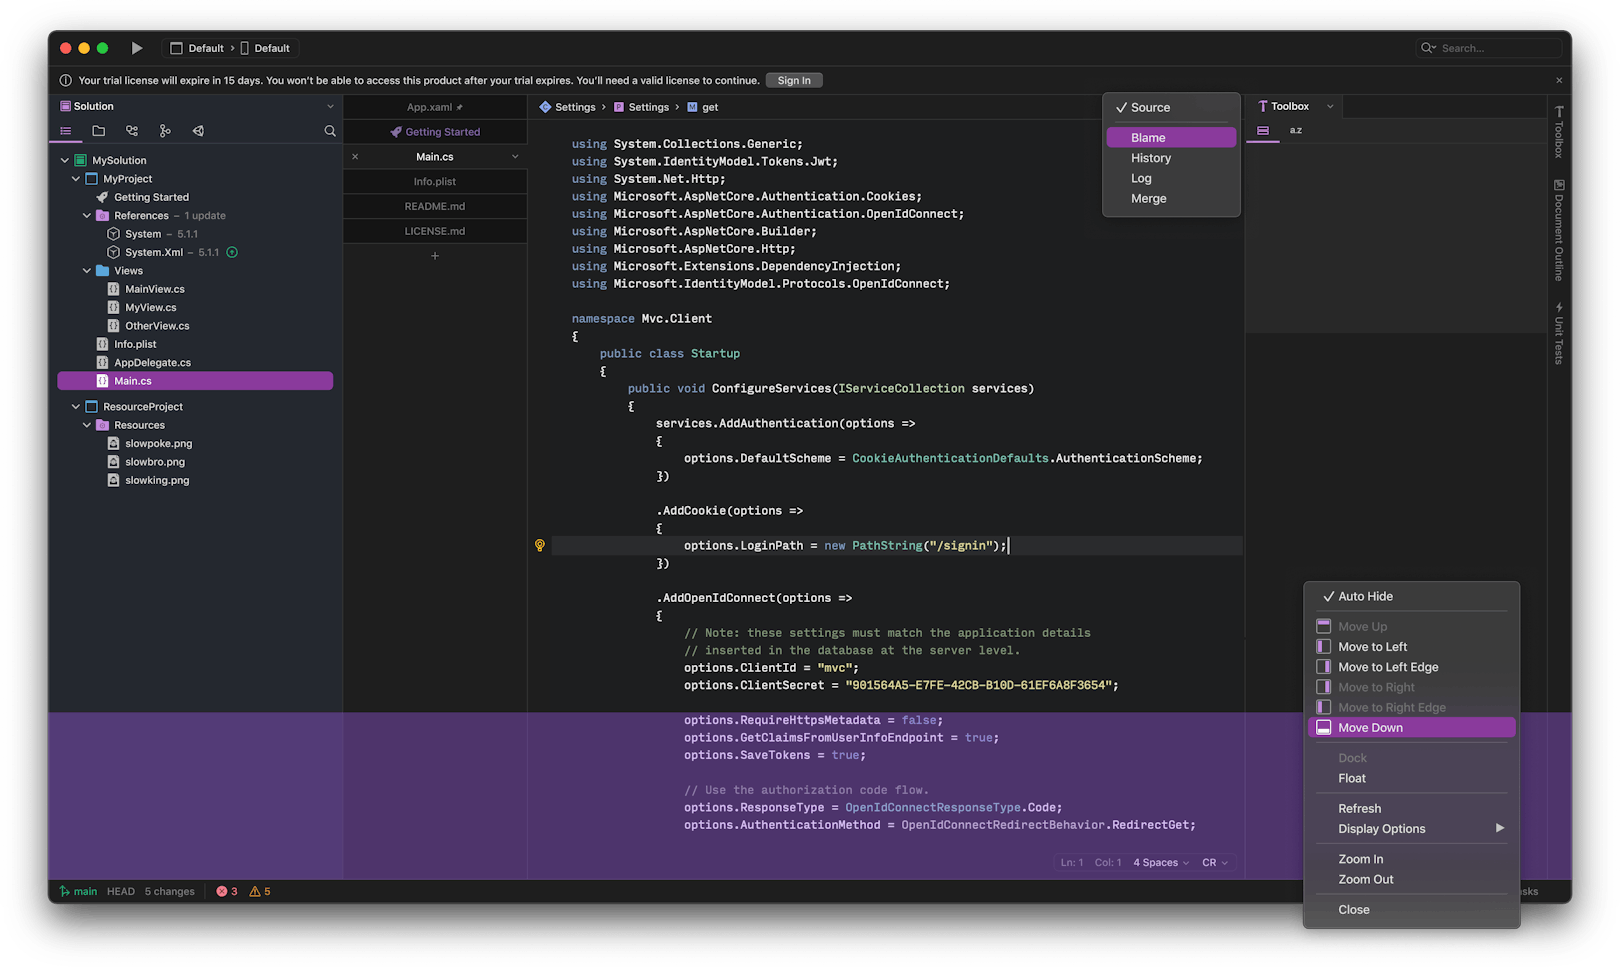 Screenshot of Visual Studio for Mac 17 interface when running in the dark theme with vertical tabs, Code Editor displaying C# code, and a notification about trial license expiration at the top.